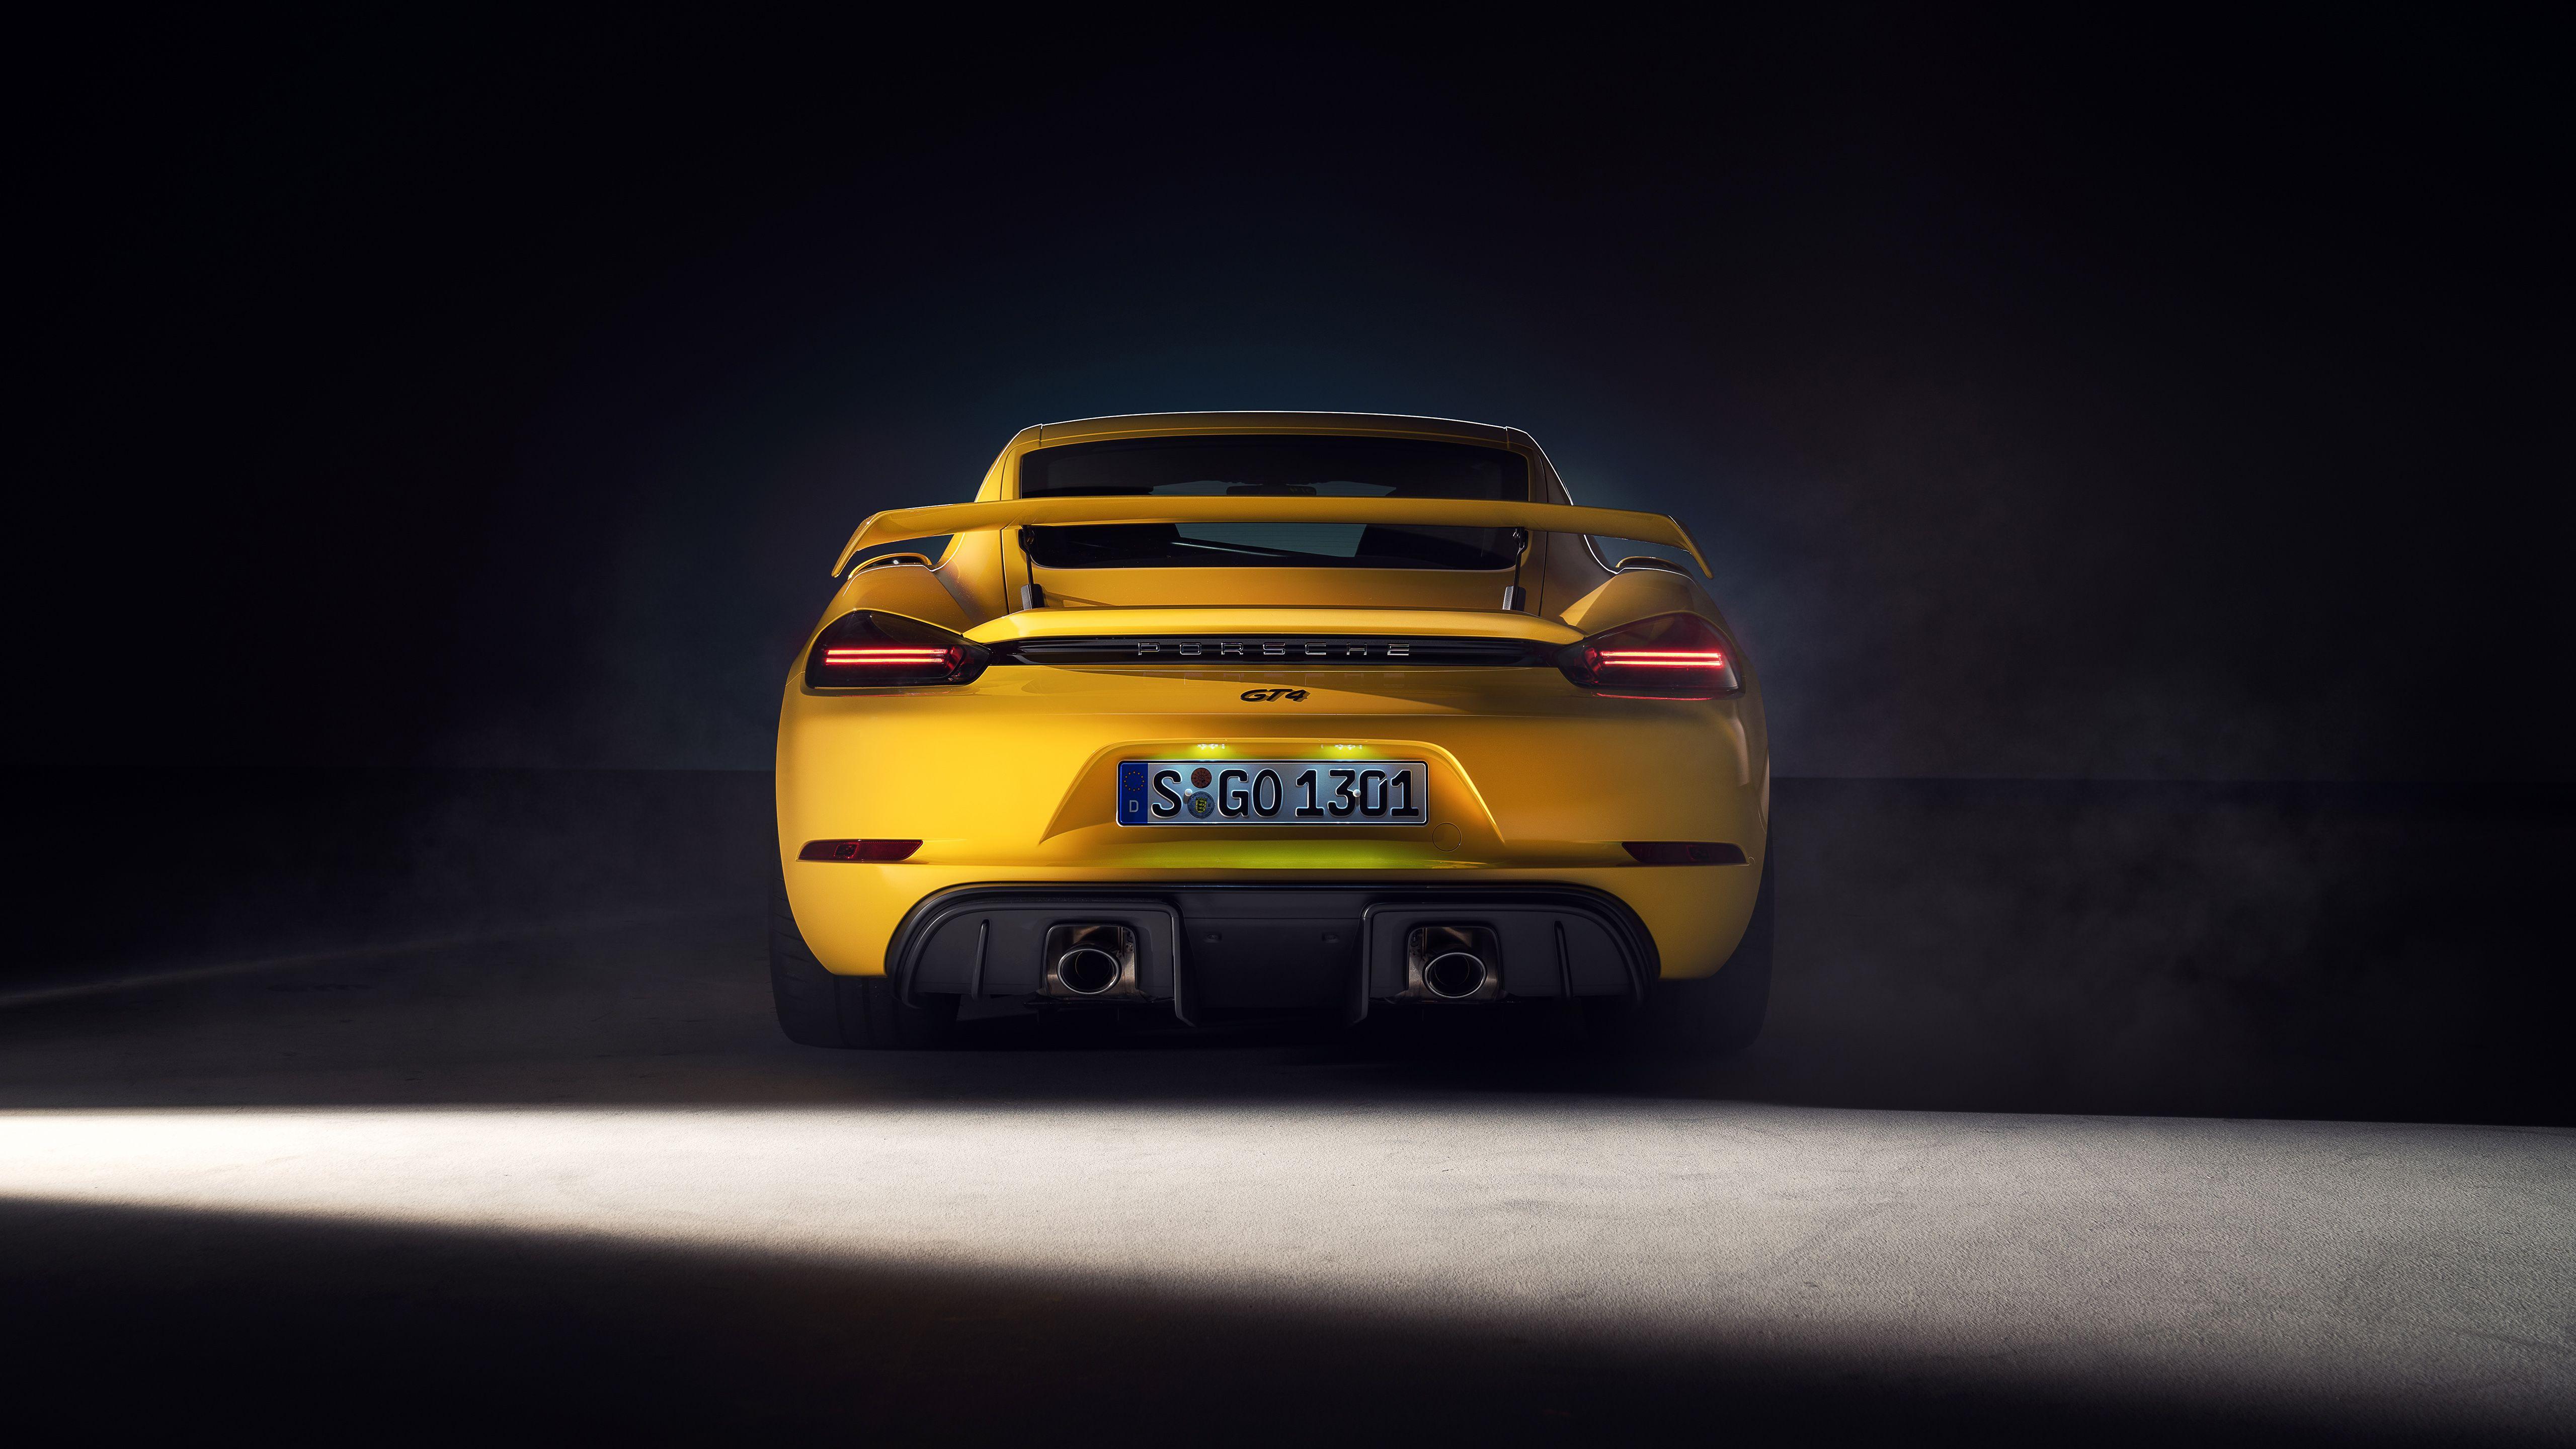 Free download Porsche Cayman Wallpapers for Iphone 7 Iphone 7 plus  [1080x1920] for your Desktop, Mobile & Tablet | Explore 74+ Porsche Cayman  Wallpaper | Porsche Cayman Wallpaper High Resolution, 2014 Porsche